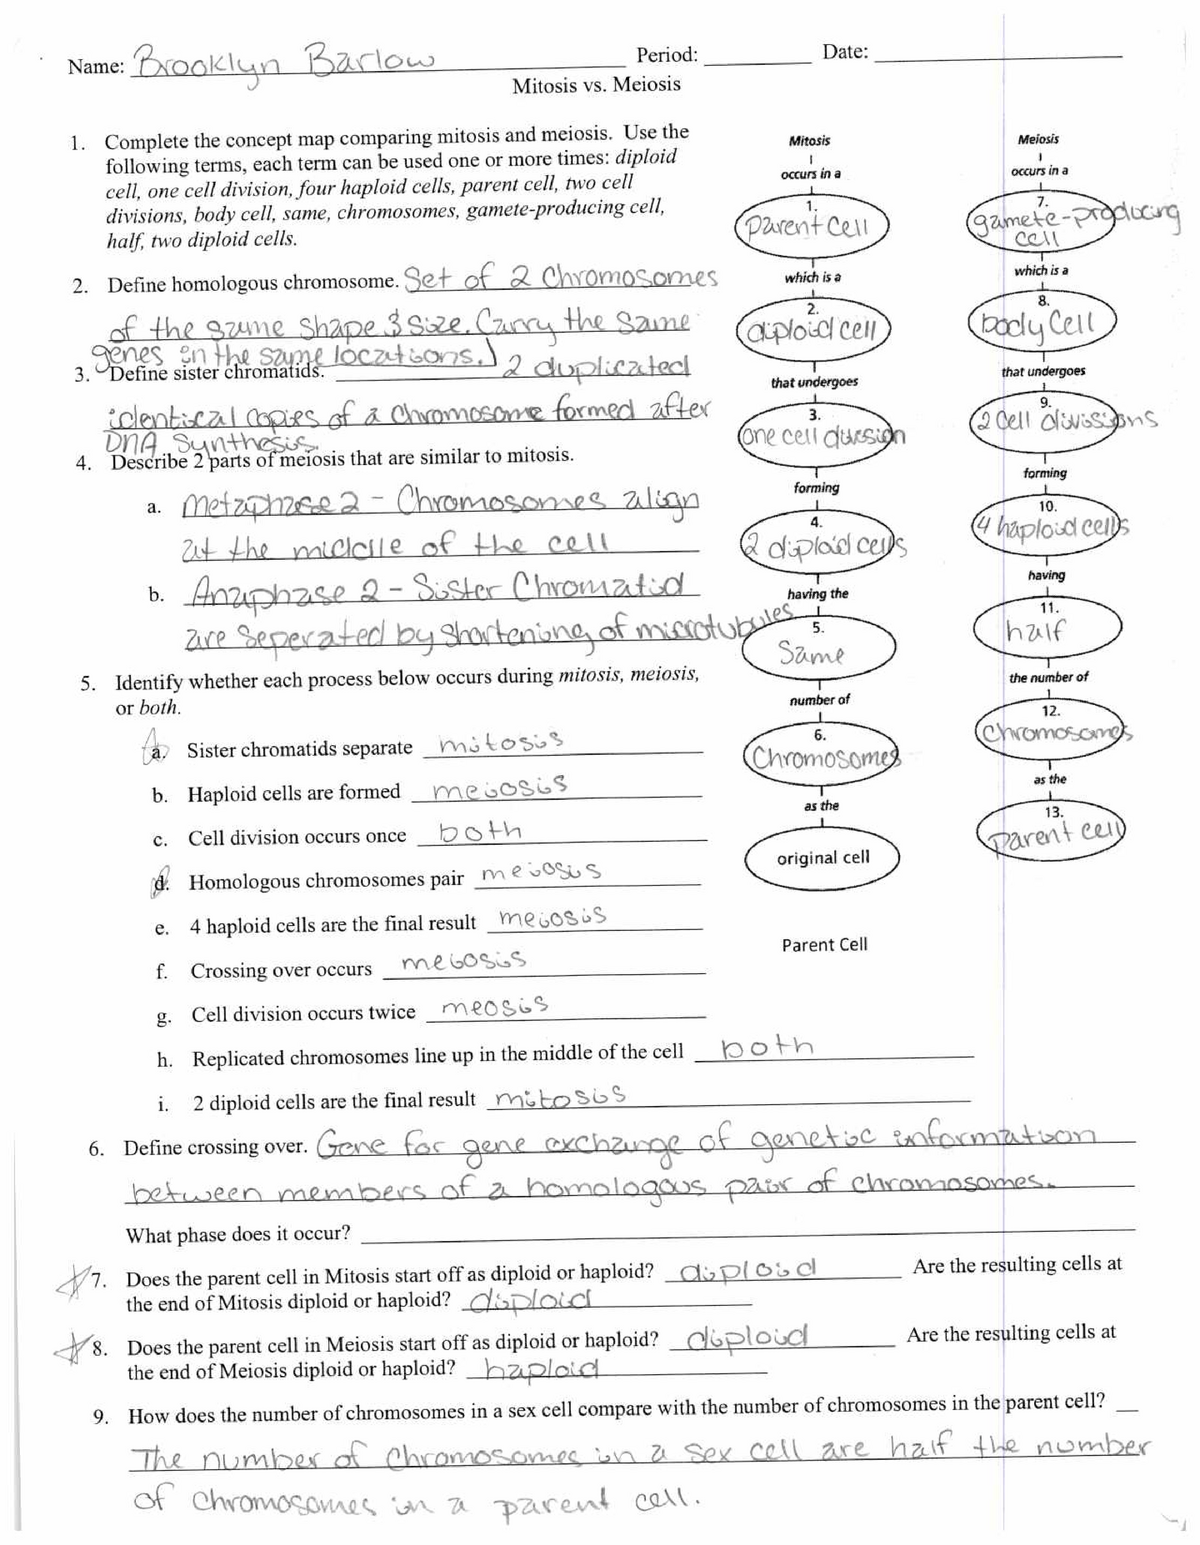 mitosis-vs-meiosis-worksheet-answer-key-mitosis-vs-meiosis-studocu-whether-you-are-looking